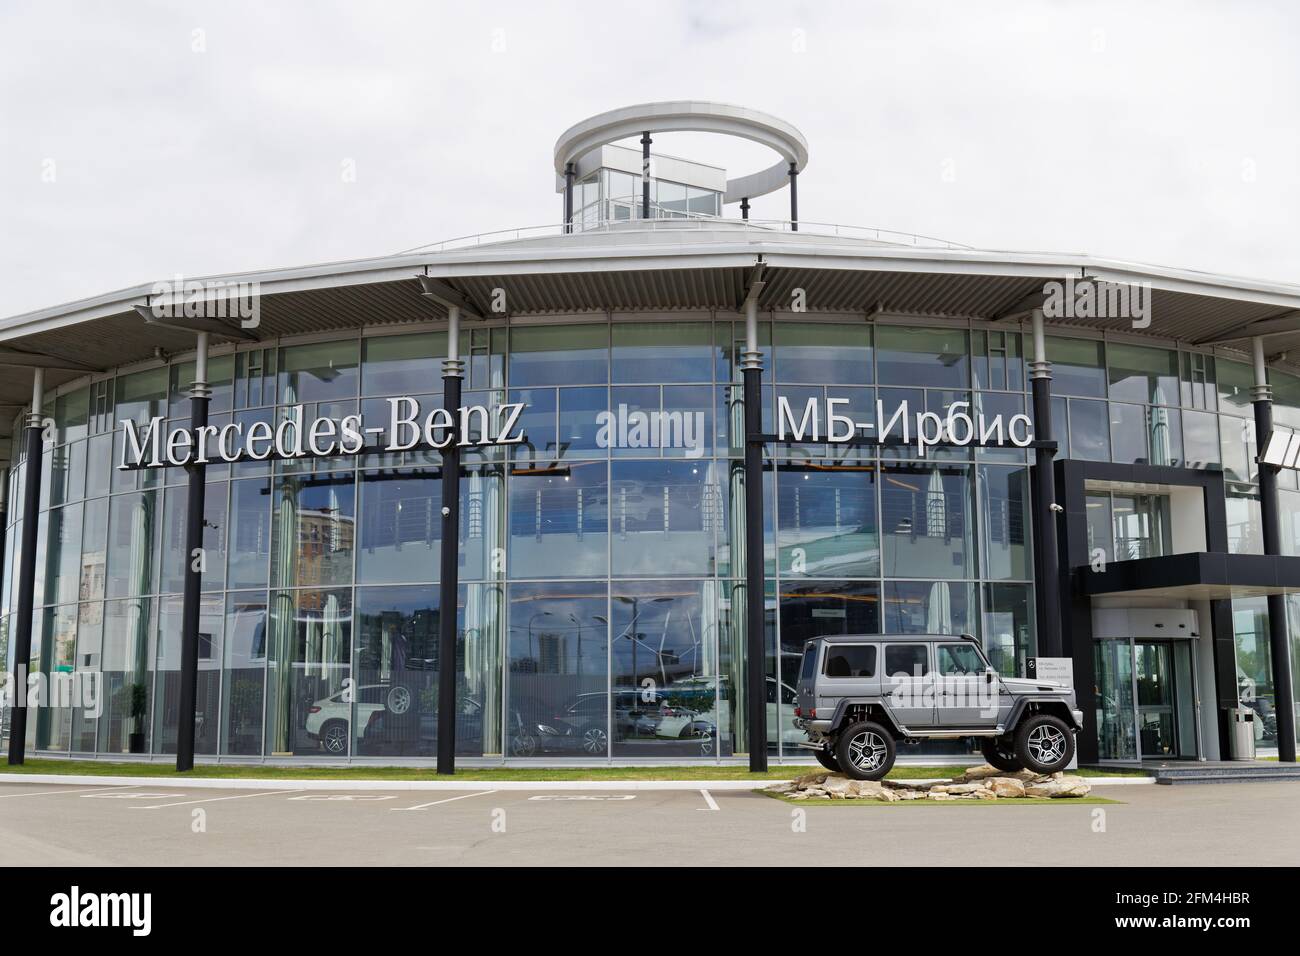 Kazan, Russia - June 11, 2018: Building of Mercedes-Benz car selling and service center Stock Photo